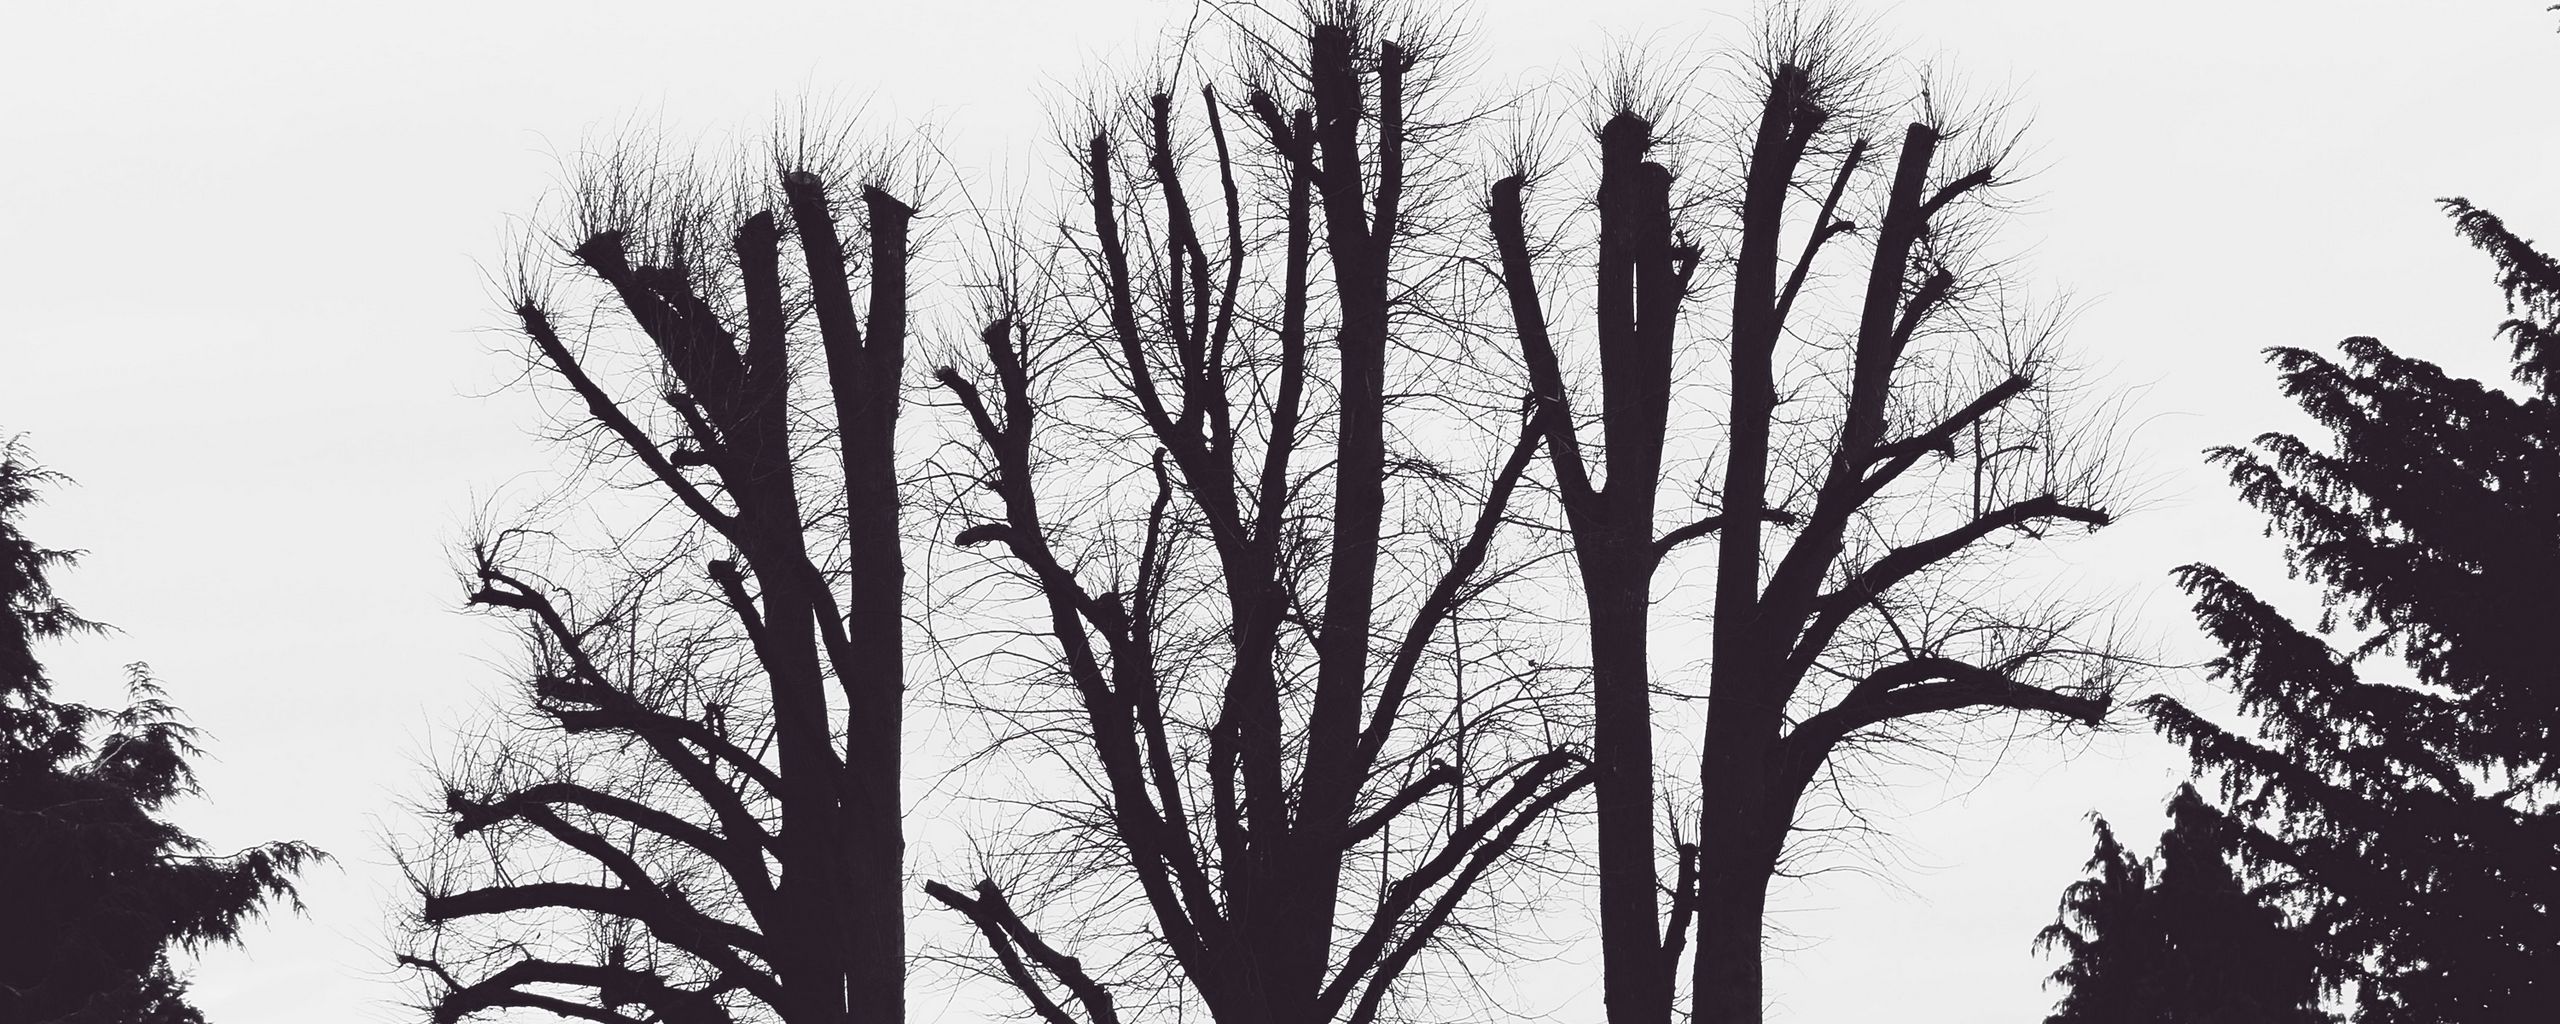 Download wallpaper 2560x1024 trees, branches, aesthetic, bw